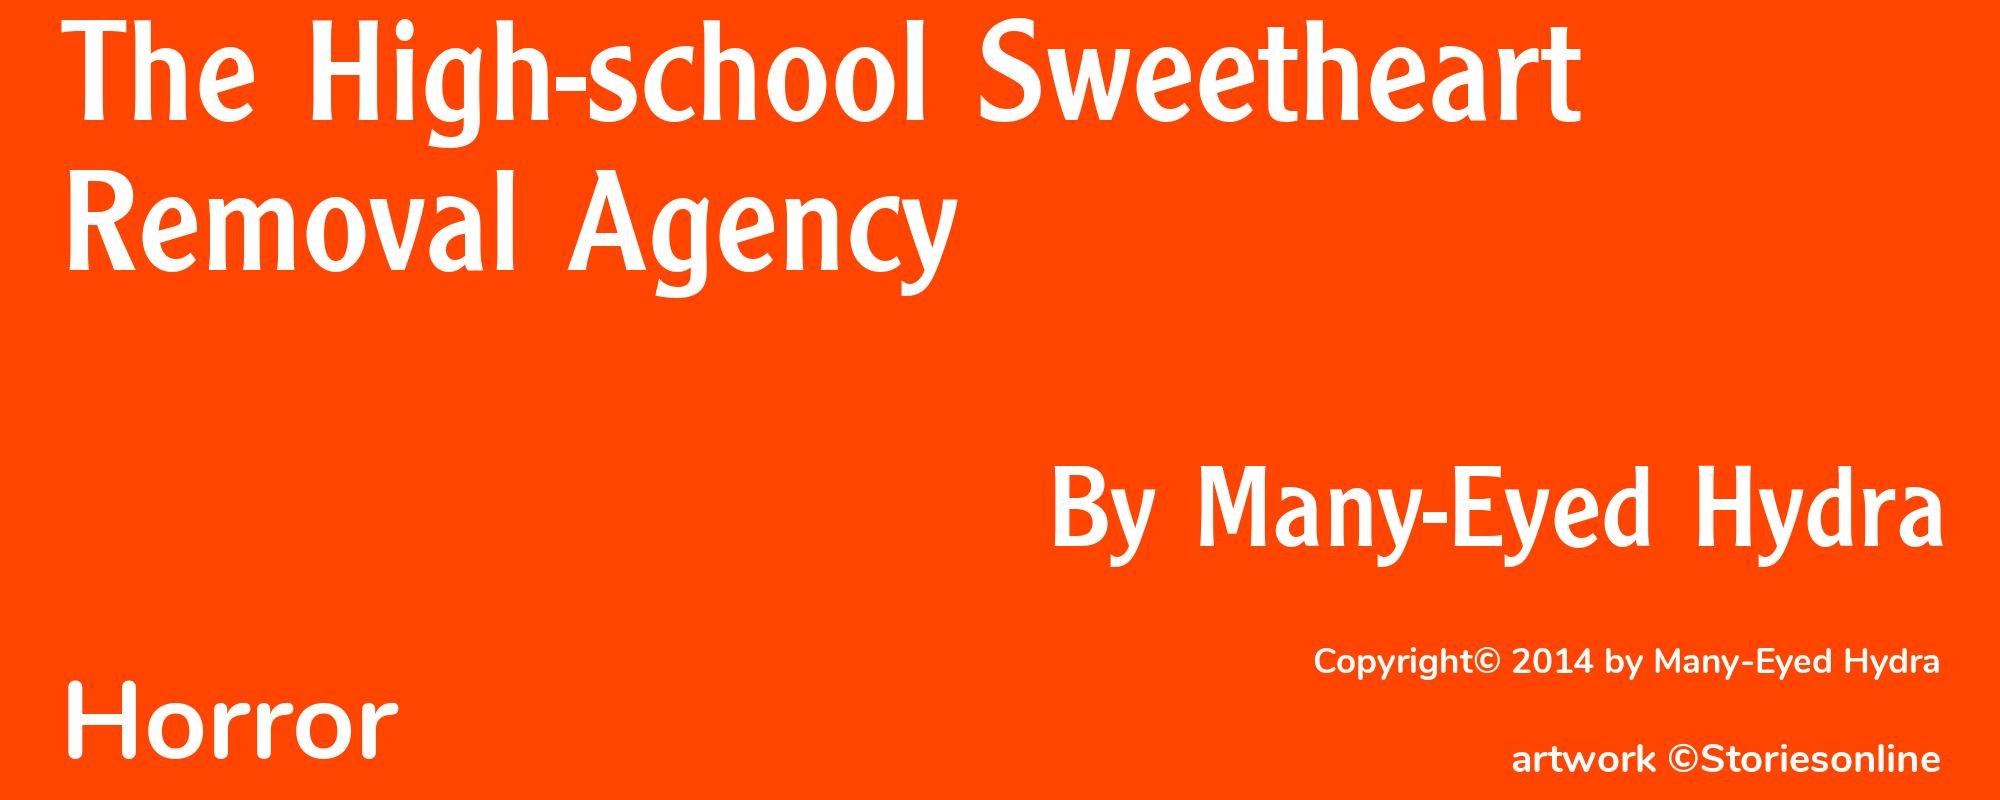 The High-school Sweetheart Removal Agency - Cover